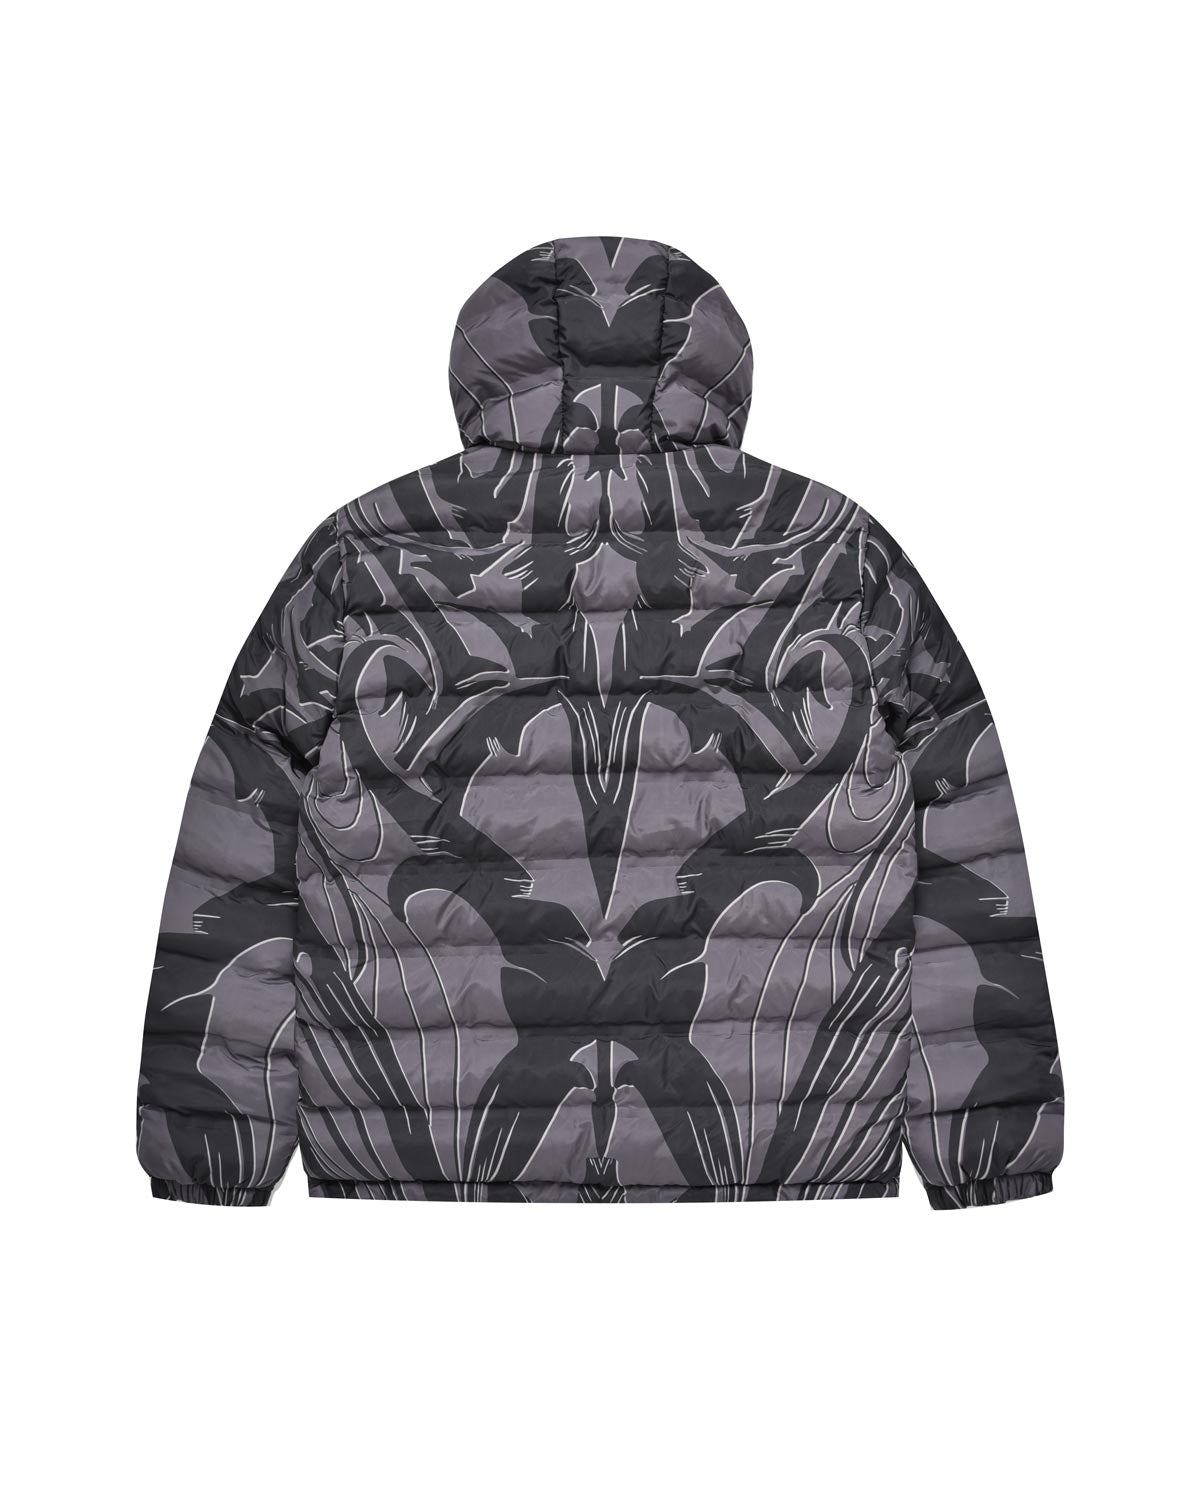 Man | Reversible Jacket With All-Over "Tribal Scorpion" Print